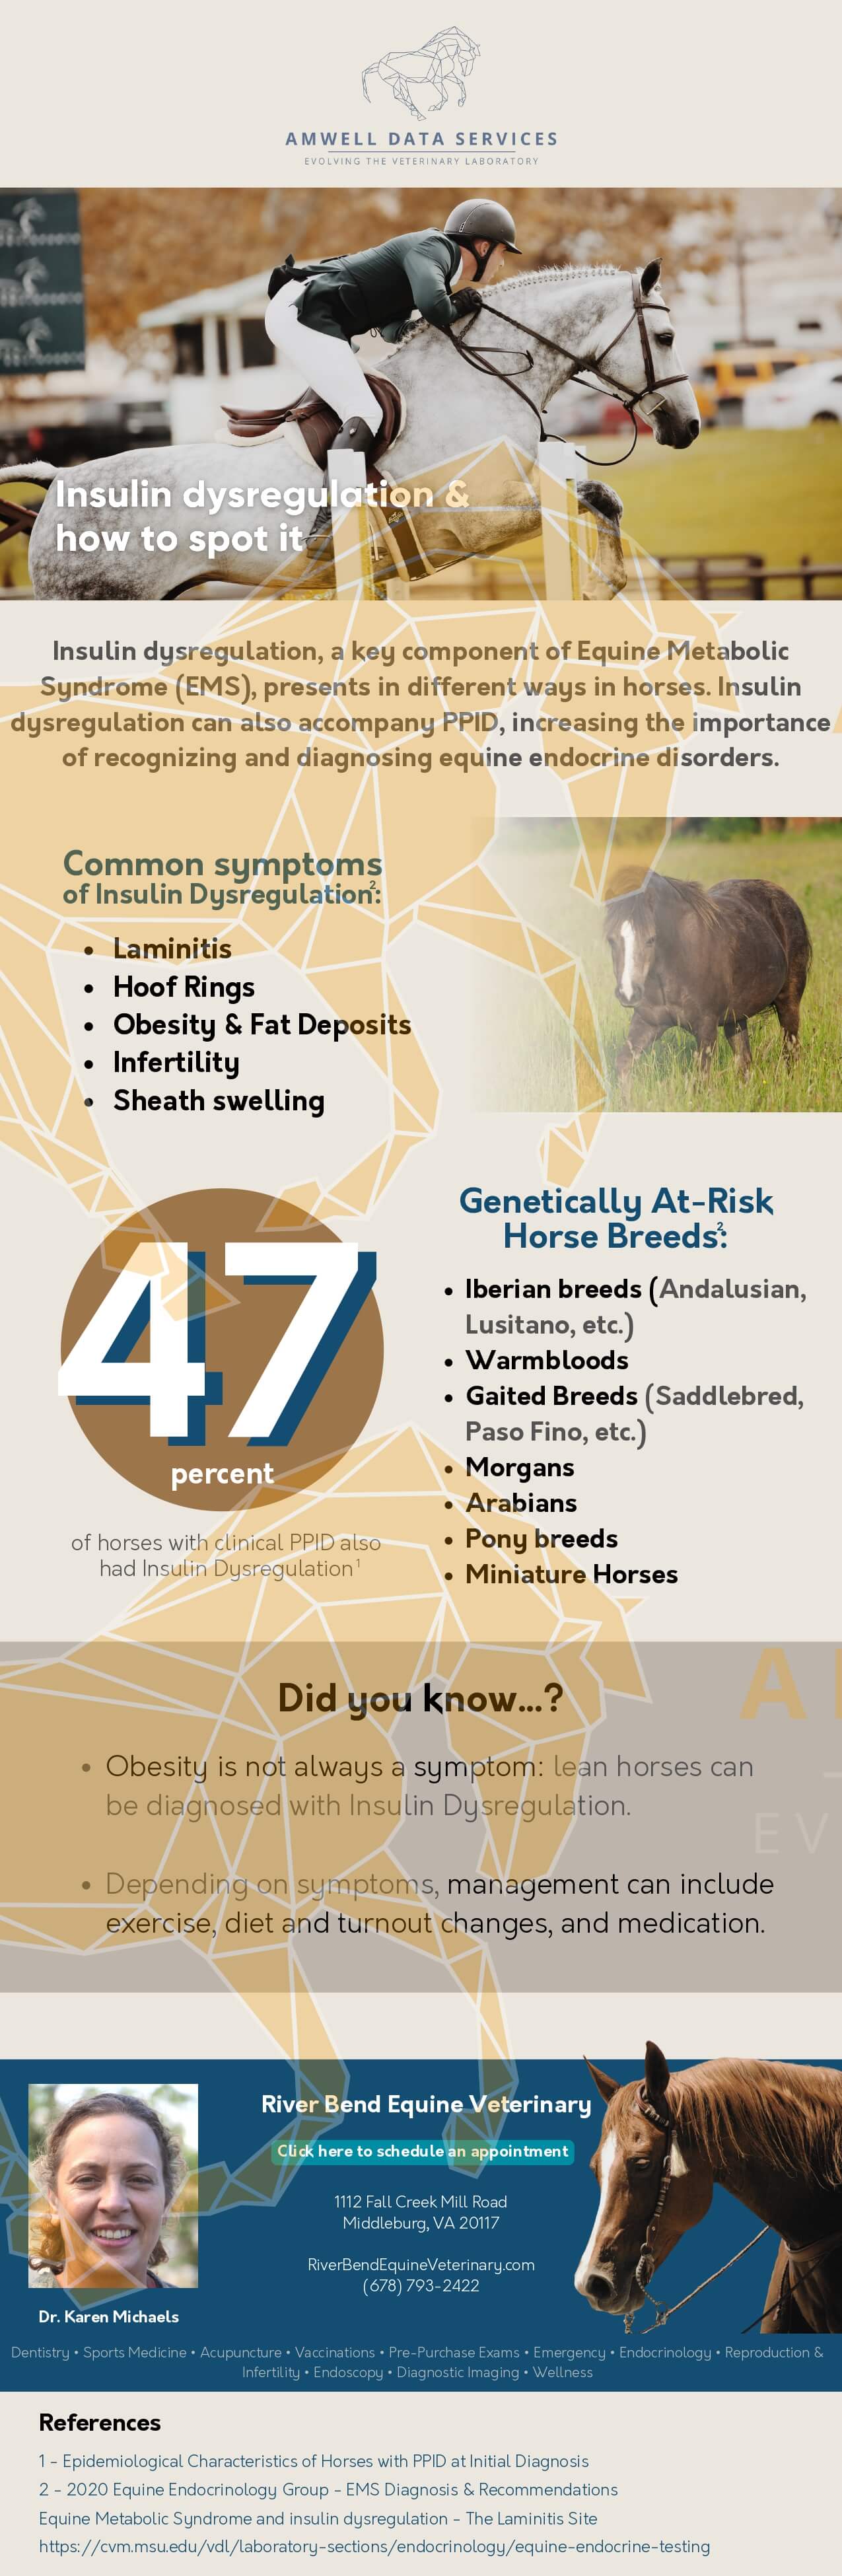 Equine Endocrine Disease #3 - Insulin Dysregulation Email Template - Amwell Data Services LLC